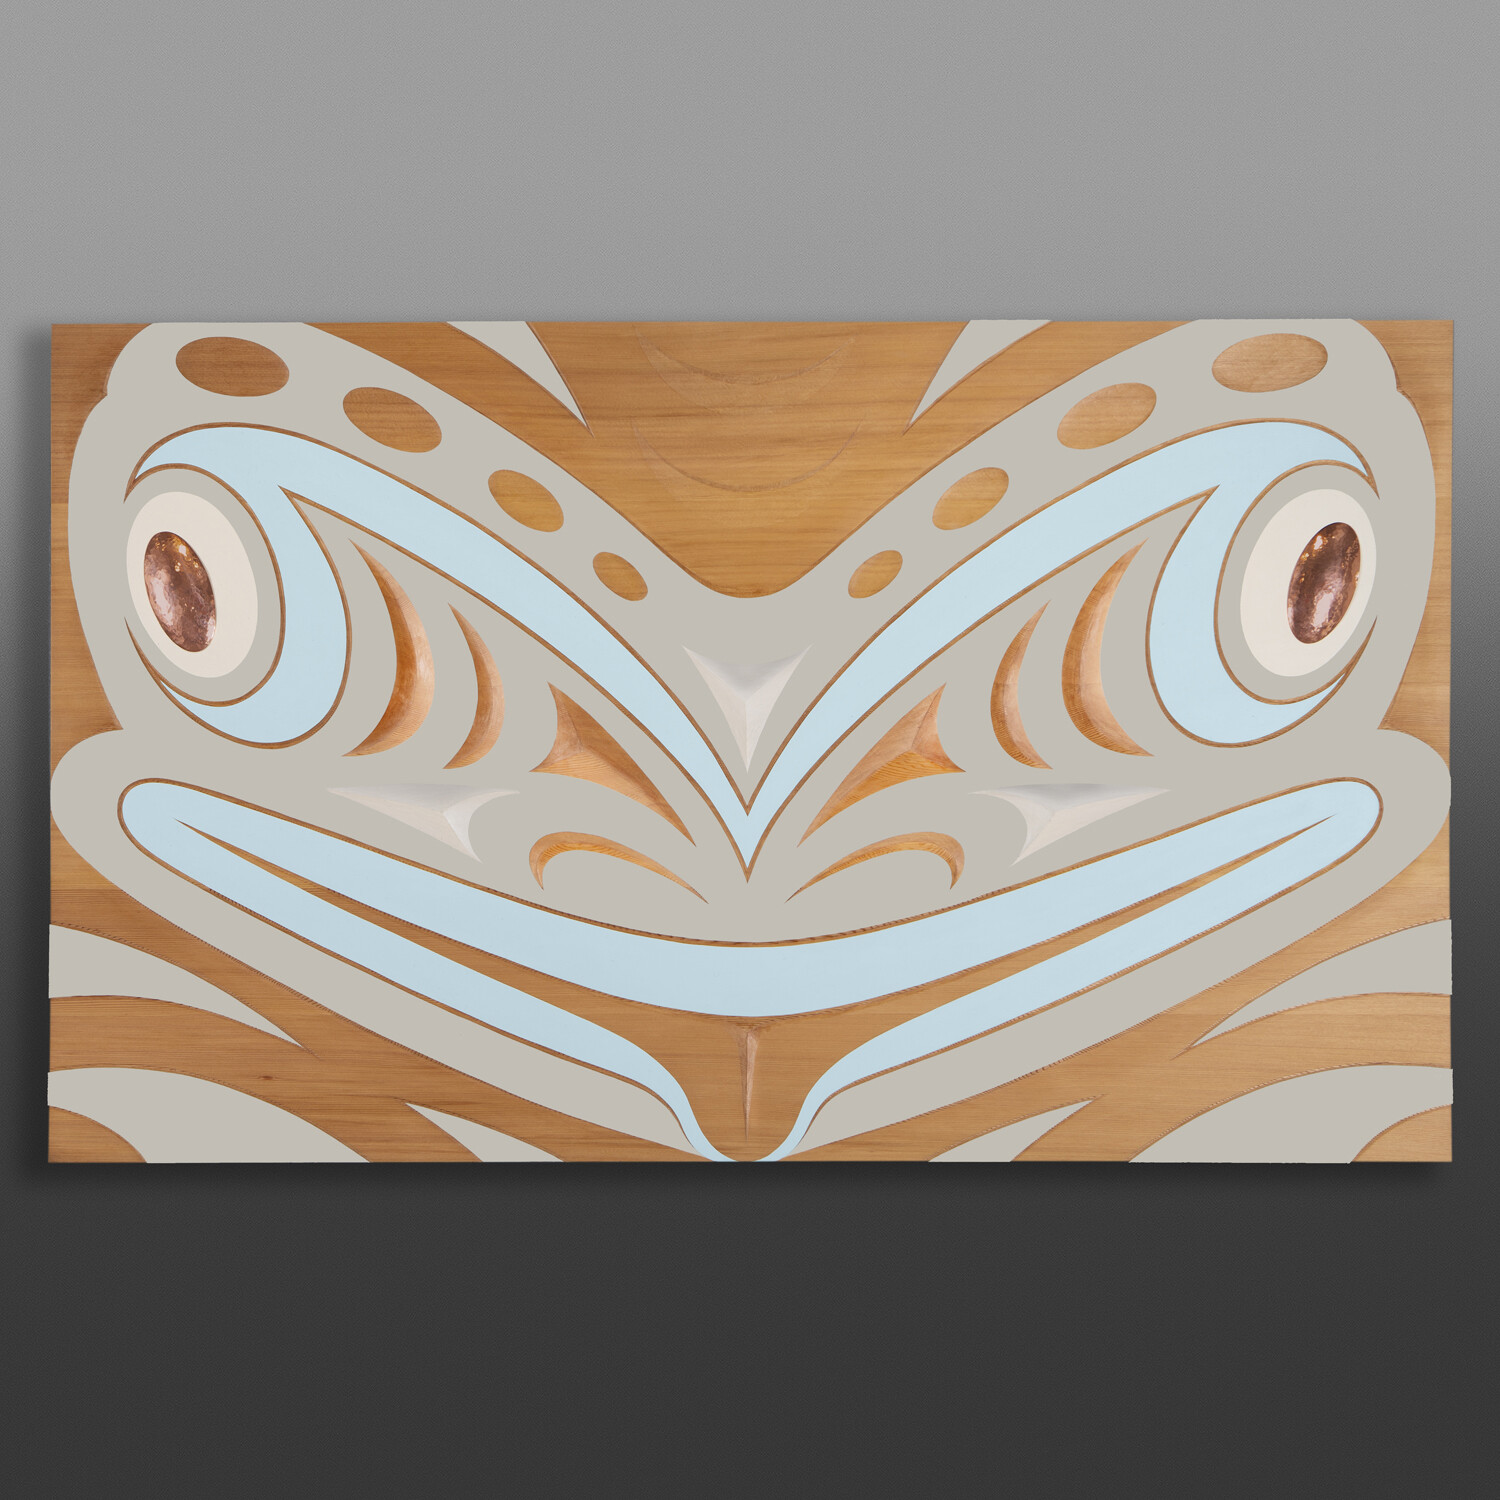 Disguised (Frog Panel)
Kelly Cannell
Coast Salish
Red cedar, paint, copper
23 ¾” x 39” x 2 ½”
$6500
